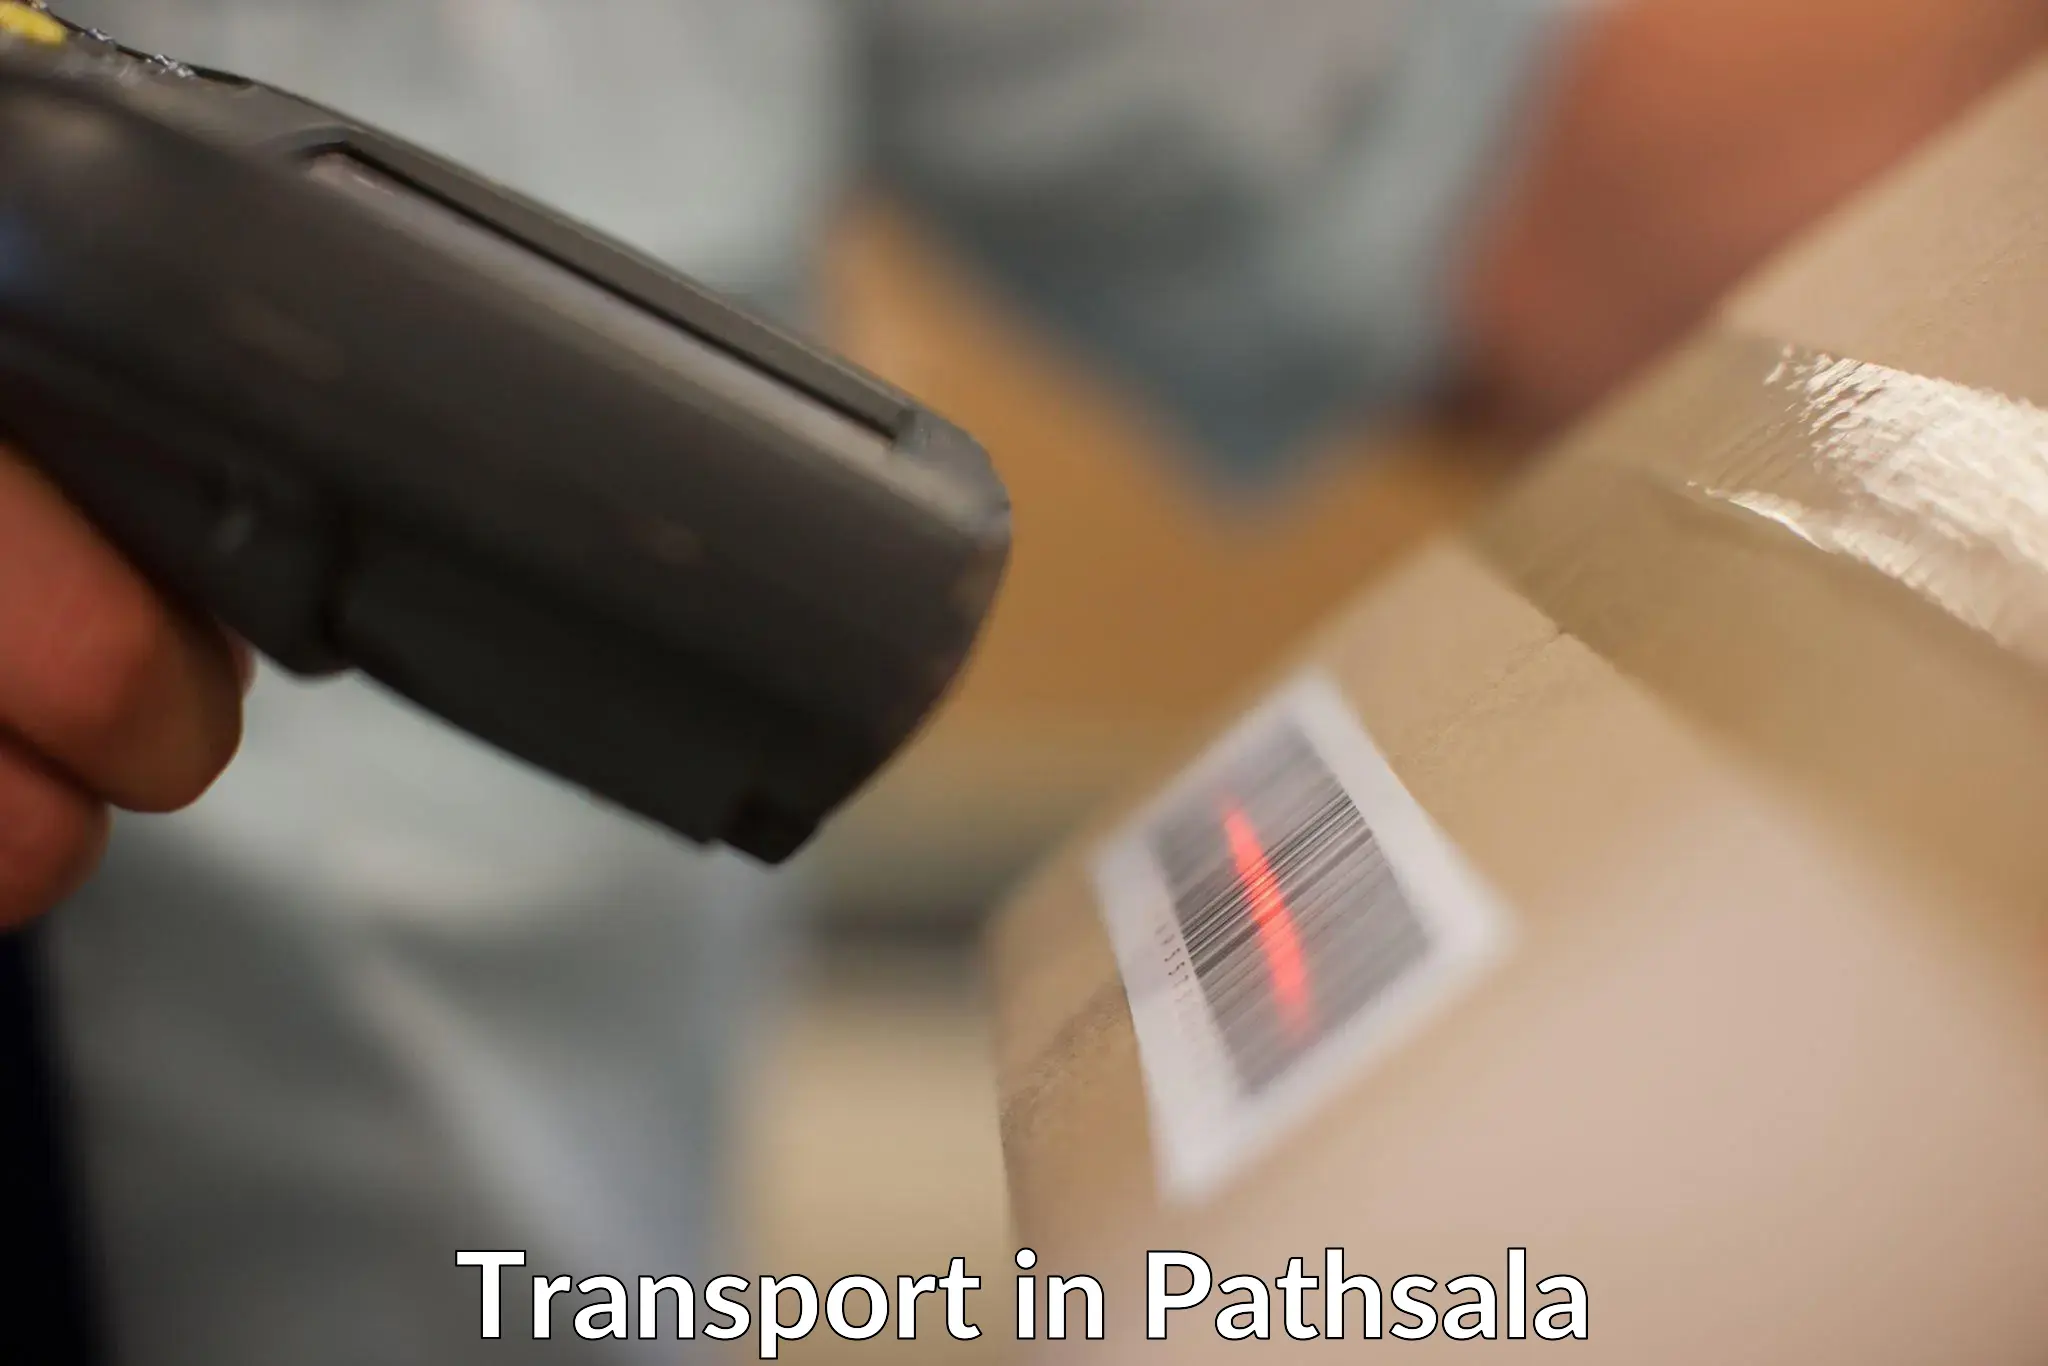 Pick up transport service in Pathsala